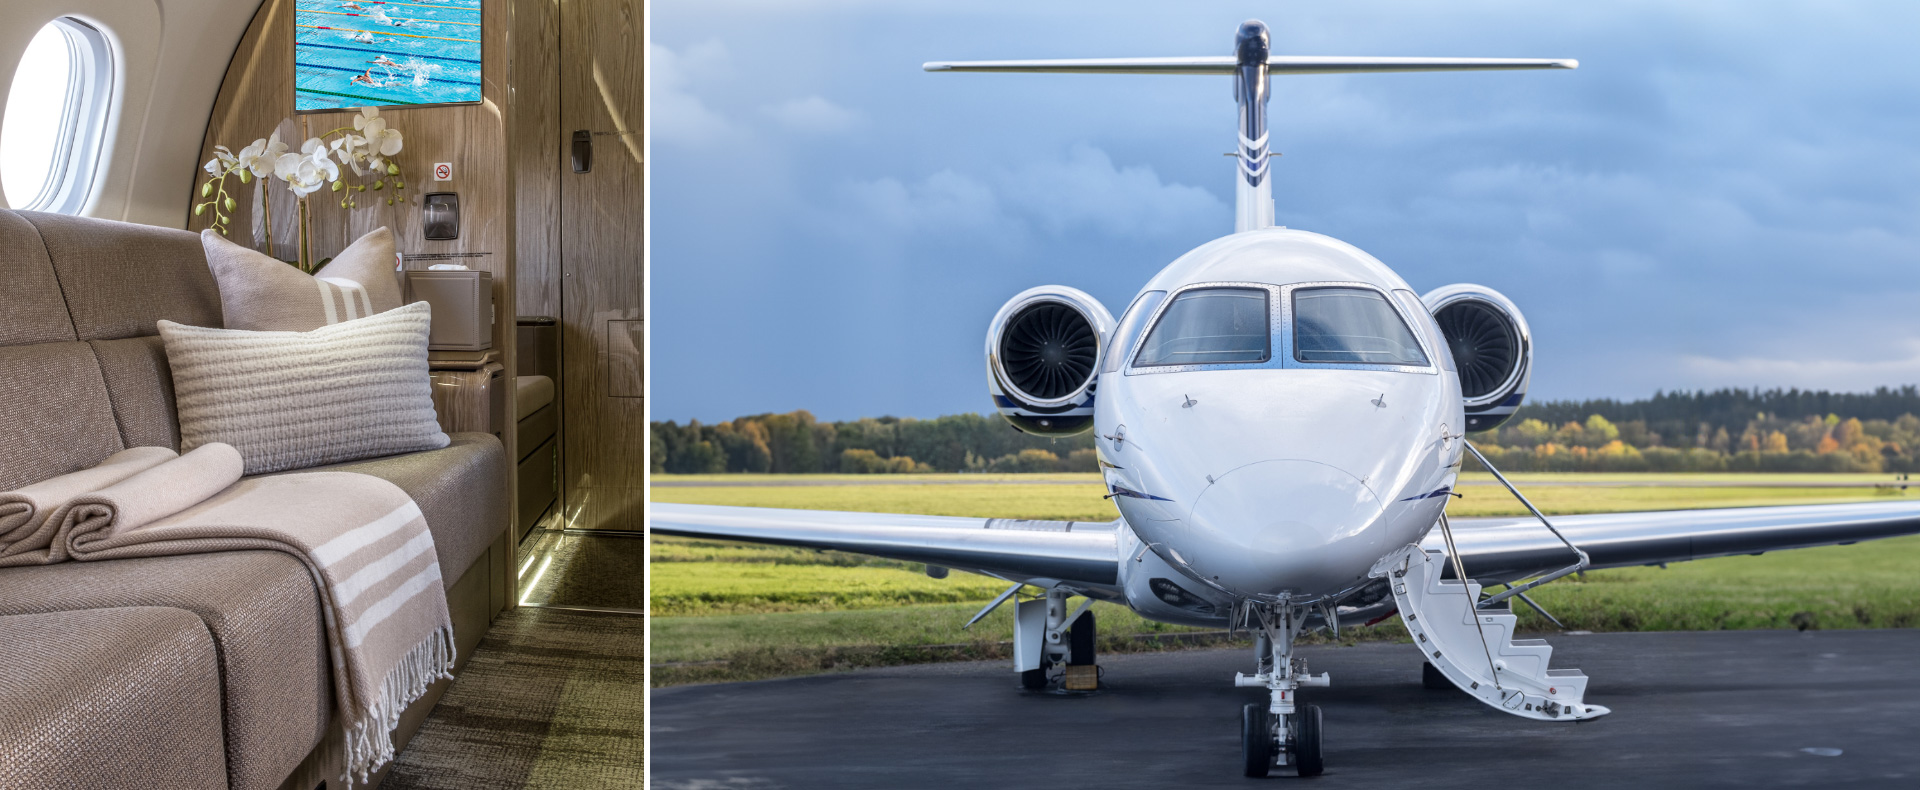 Private jet charter service for Paris Sporting Events, offering luxury travel with private charter flights and the option to charter a private jet for an exclusive experience.